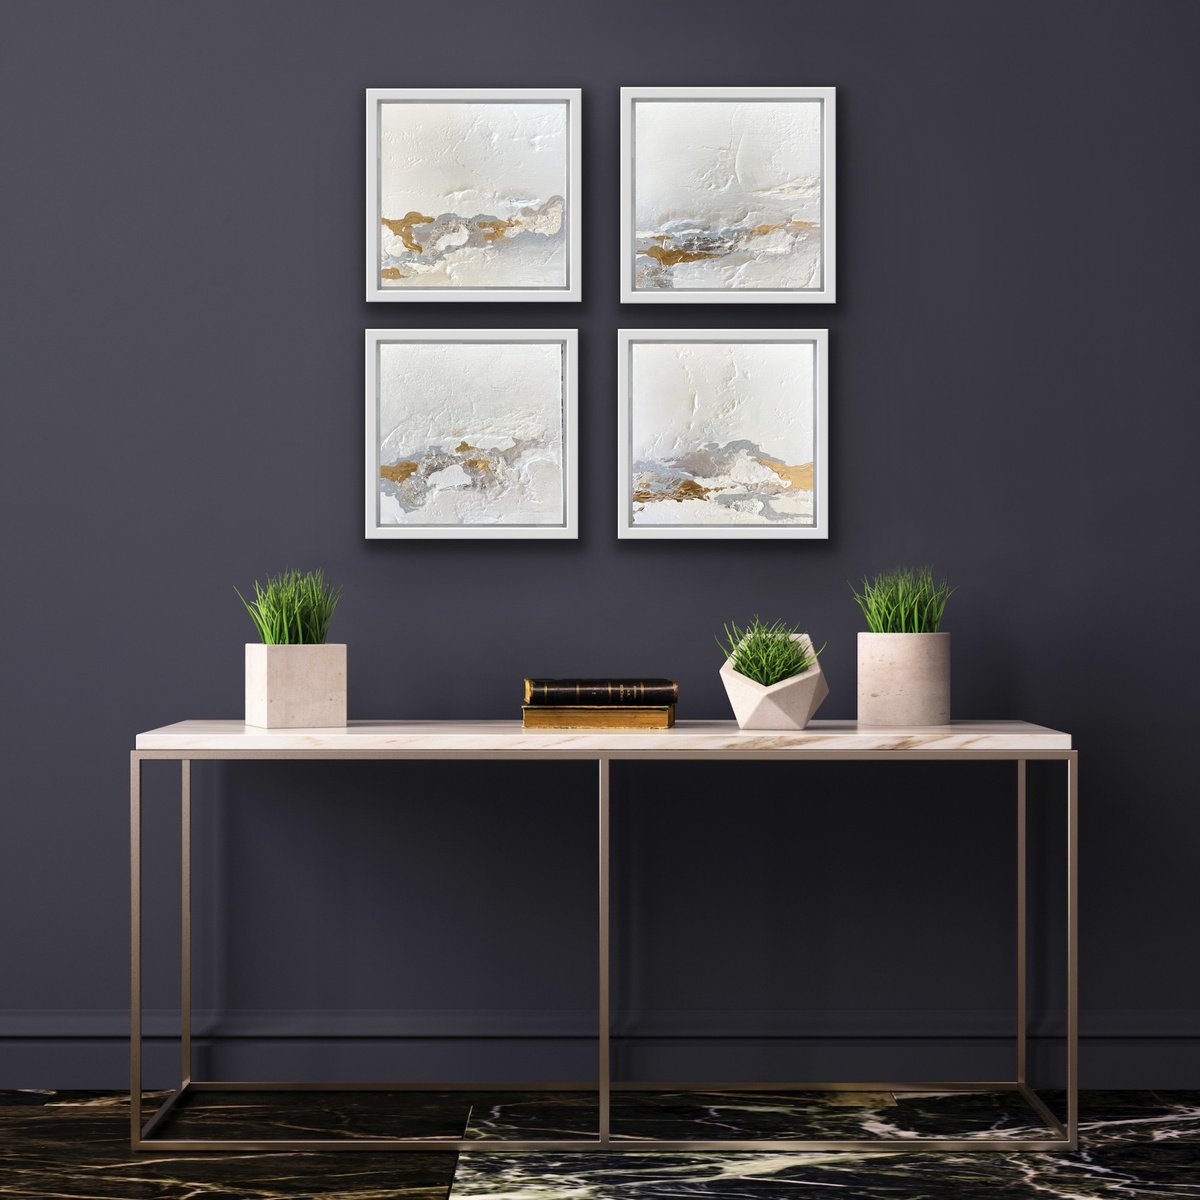 Poetic Landscape XI - Composition 4 paintings framed - Wall Art Ready to hang - Muted Colo... by Daniela Pasqualini